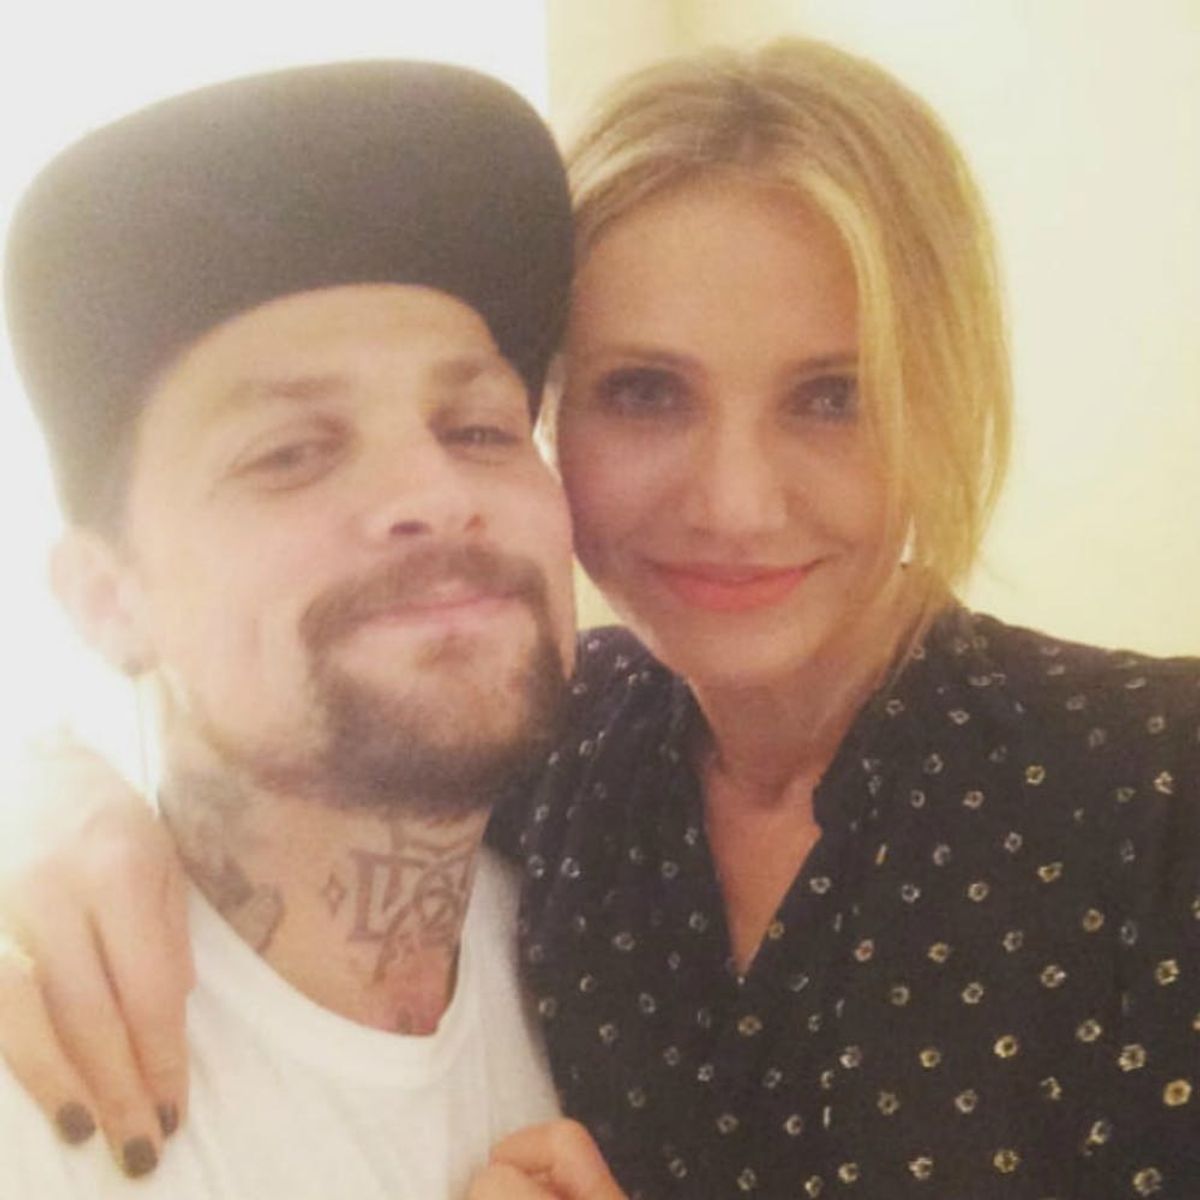 Cameron Diaz Proves She’s Benji Madden’s Biggest Cheerleader With This Super Sentimental Post